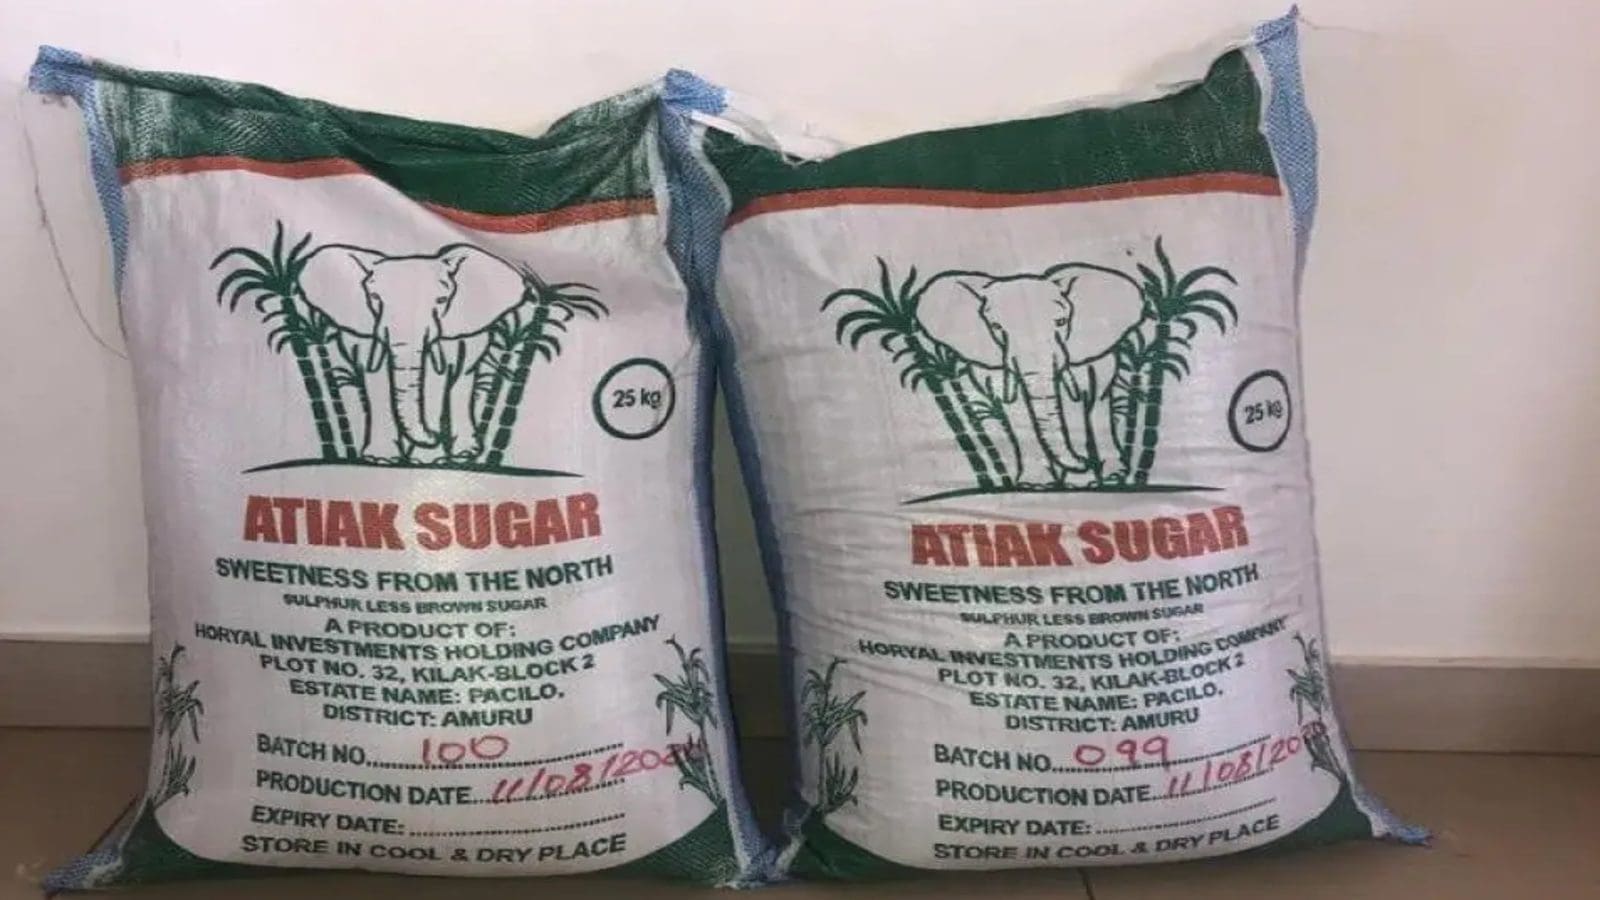 Ugandan Government seeks US$72.9m to rescue Atiak Sugar Factory from Equity Bank’s takeover